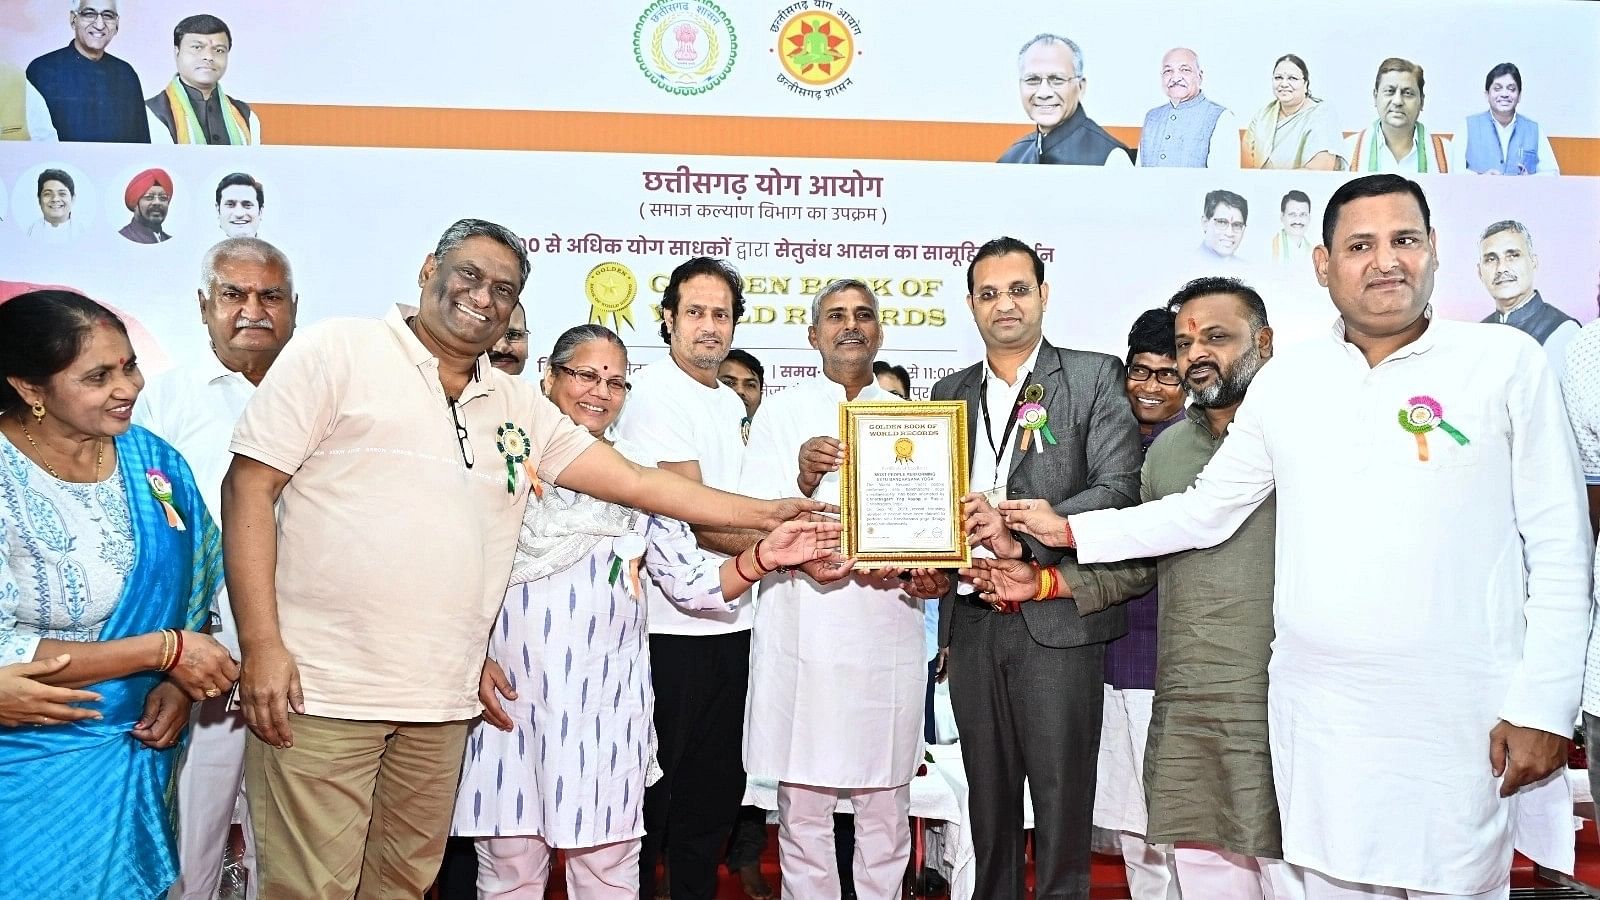 <div class="paragraphs"><p>Chhattisgarh has entered the Golden Book of World Records for its  performance of 'Setu Bandhasana' by 2,000 yoga practitioners, forming a tricolour pattern on Sunday, 11 September.</p></div>